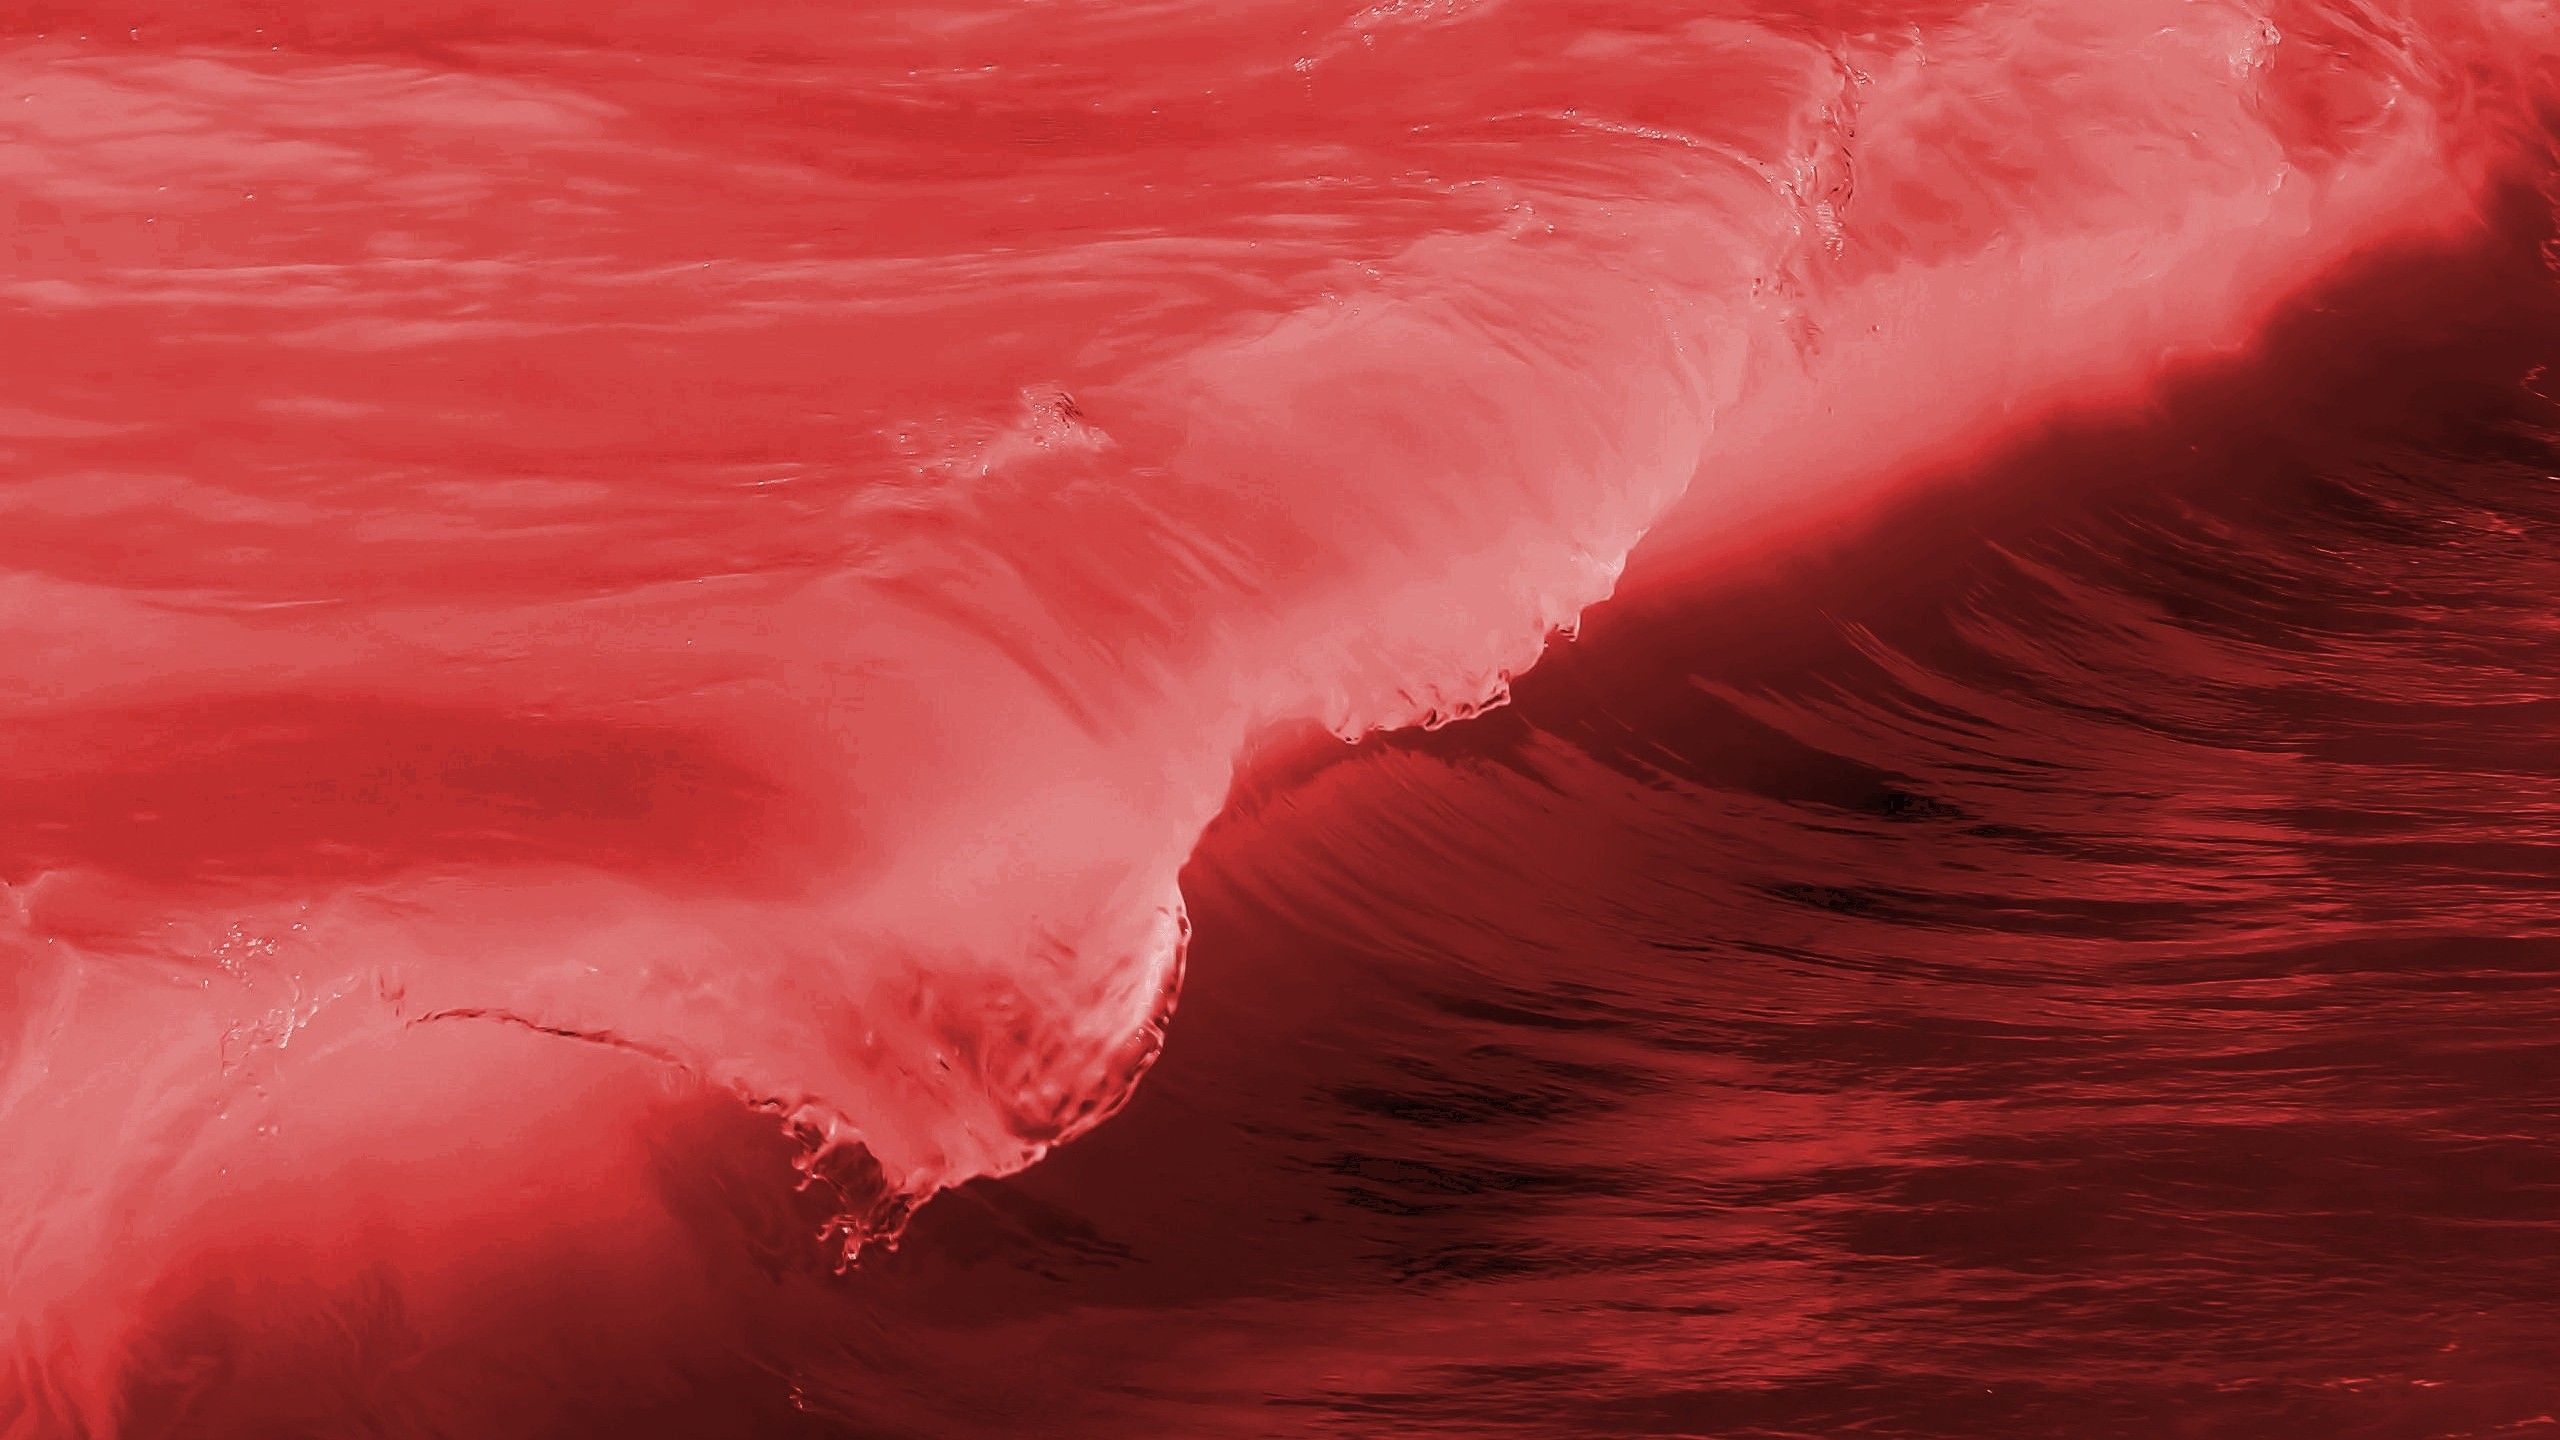 A surfer riding the waves in red water - Wave